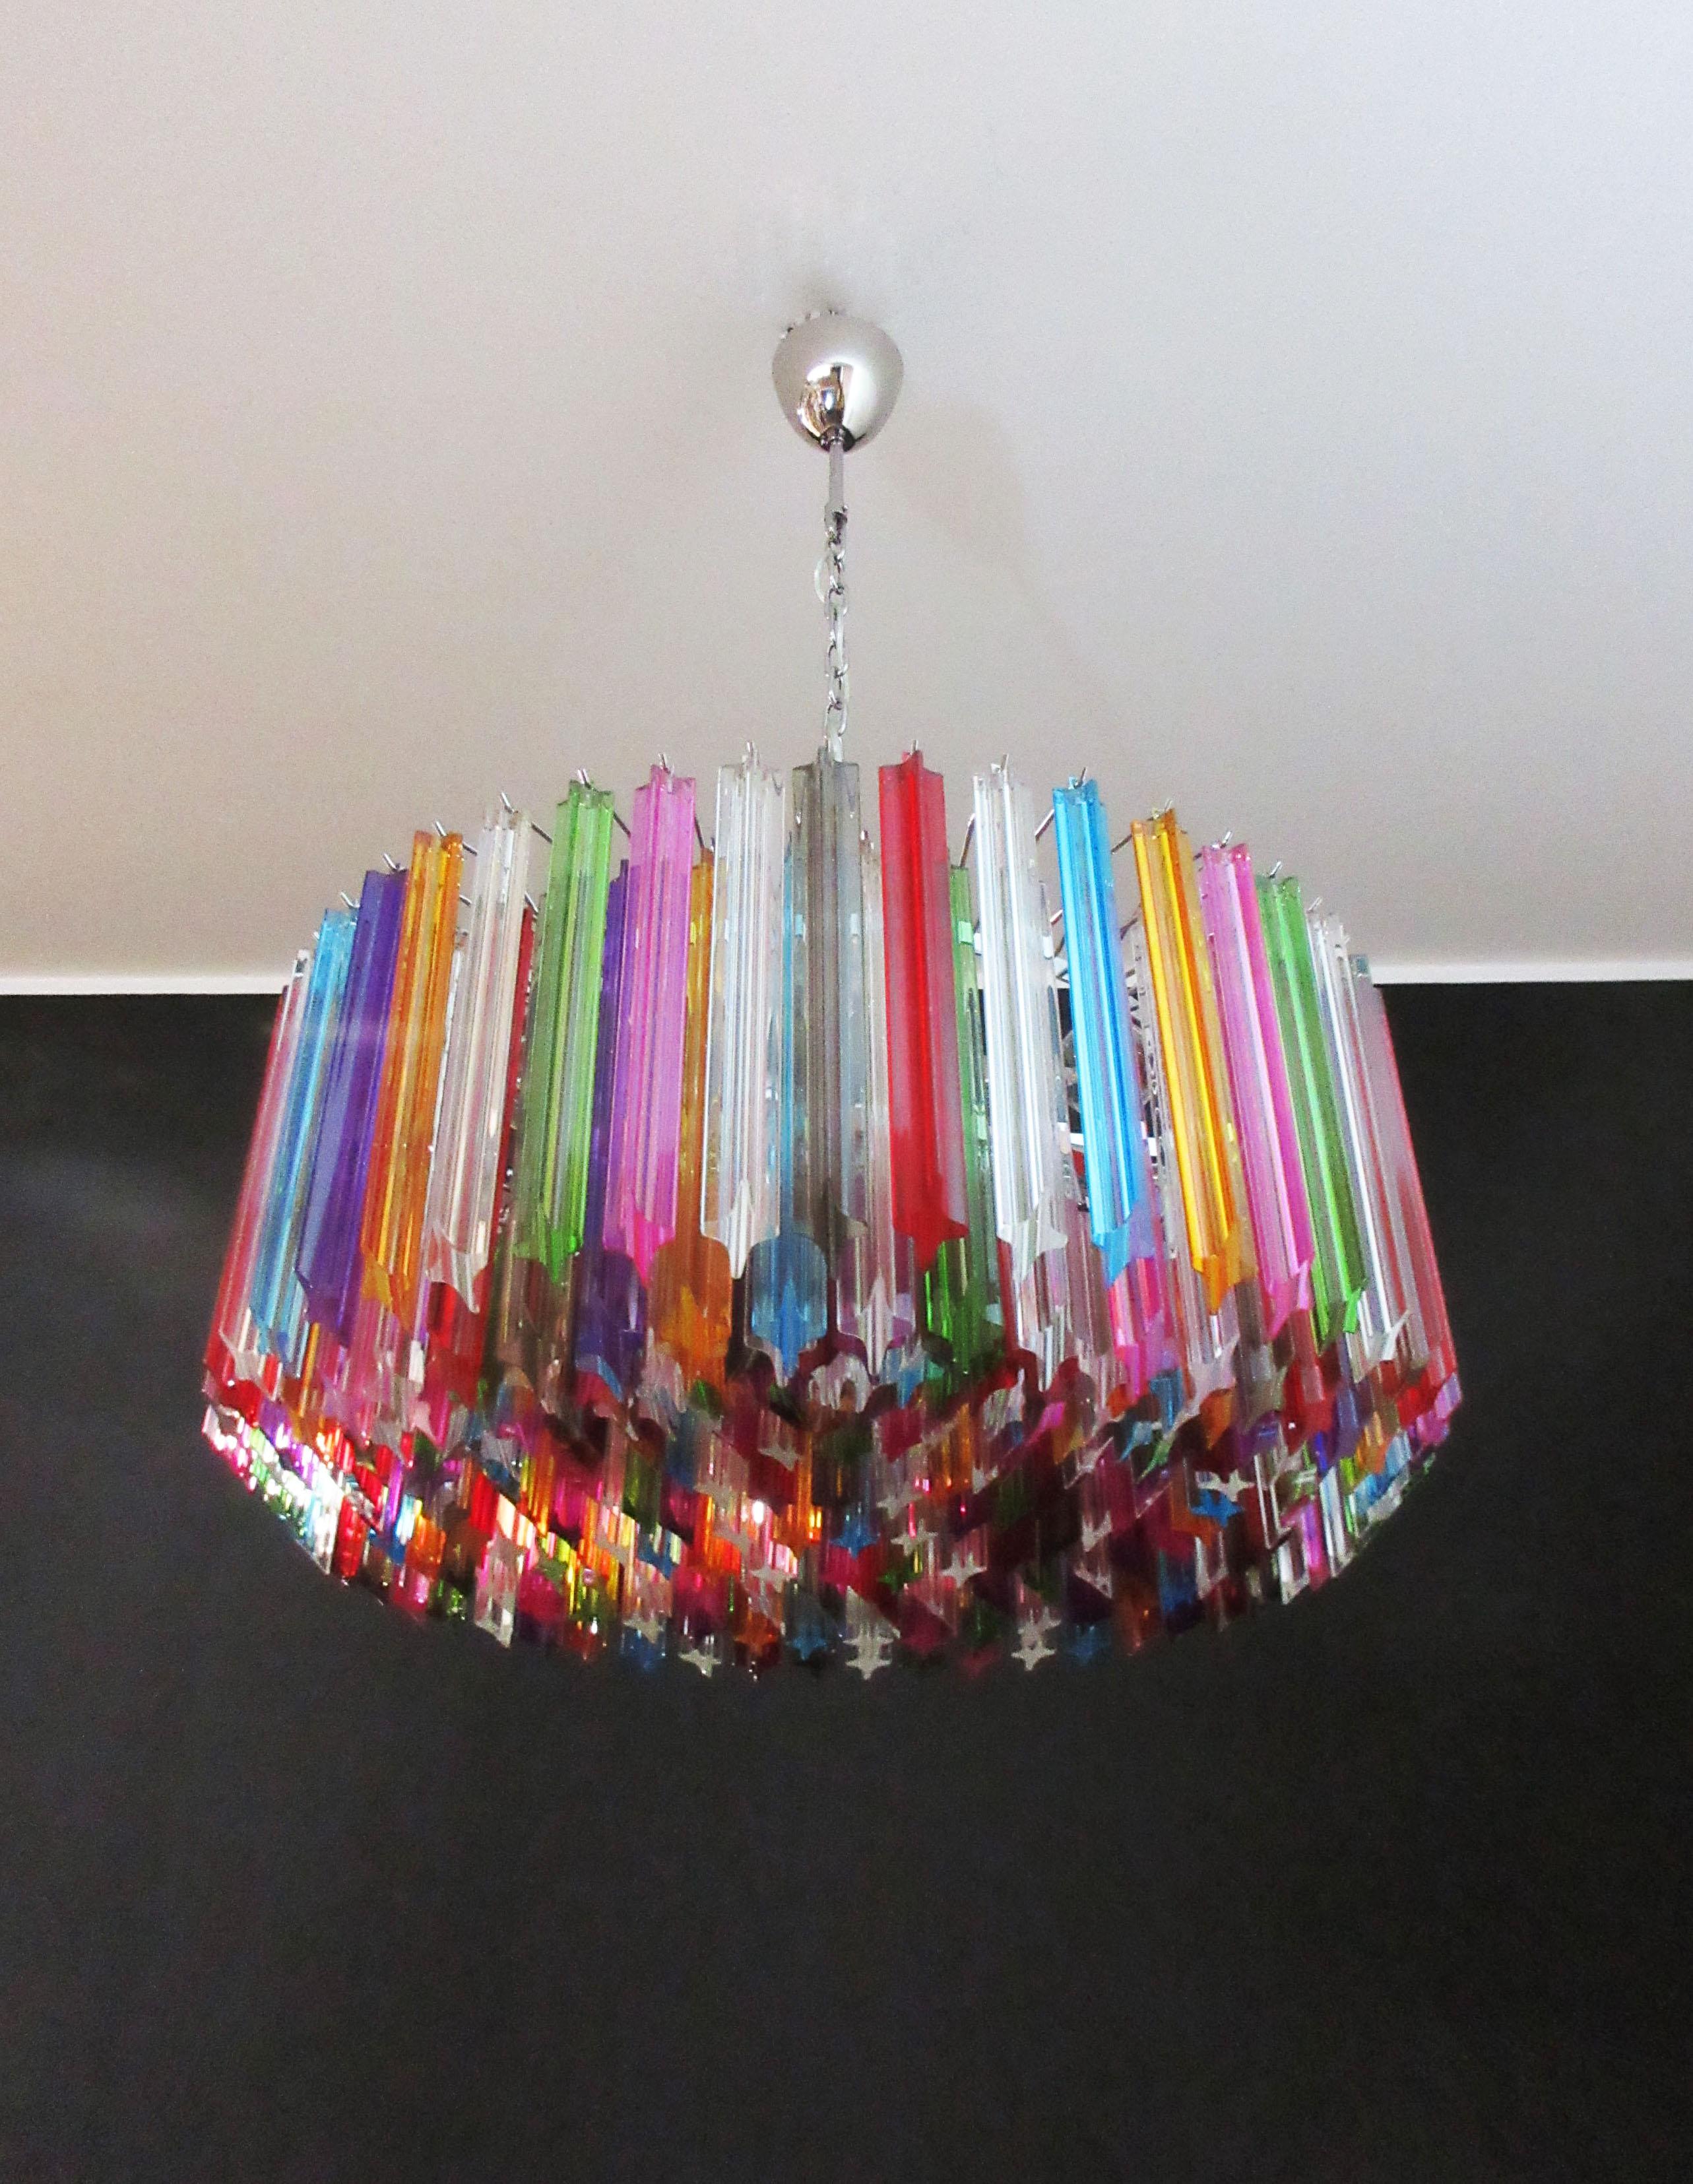 A magnificent Murano glass chandelier, 265 multicolored quadriedri on crome frame. This large midcentury Italian chandelier is truly a timeless classic.
Period: late 20th century
Dimensions: 43.30 inches (110 cm) height with chain, 15.75 inches